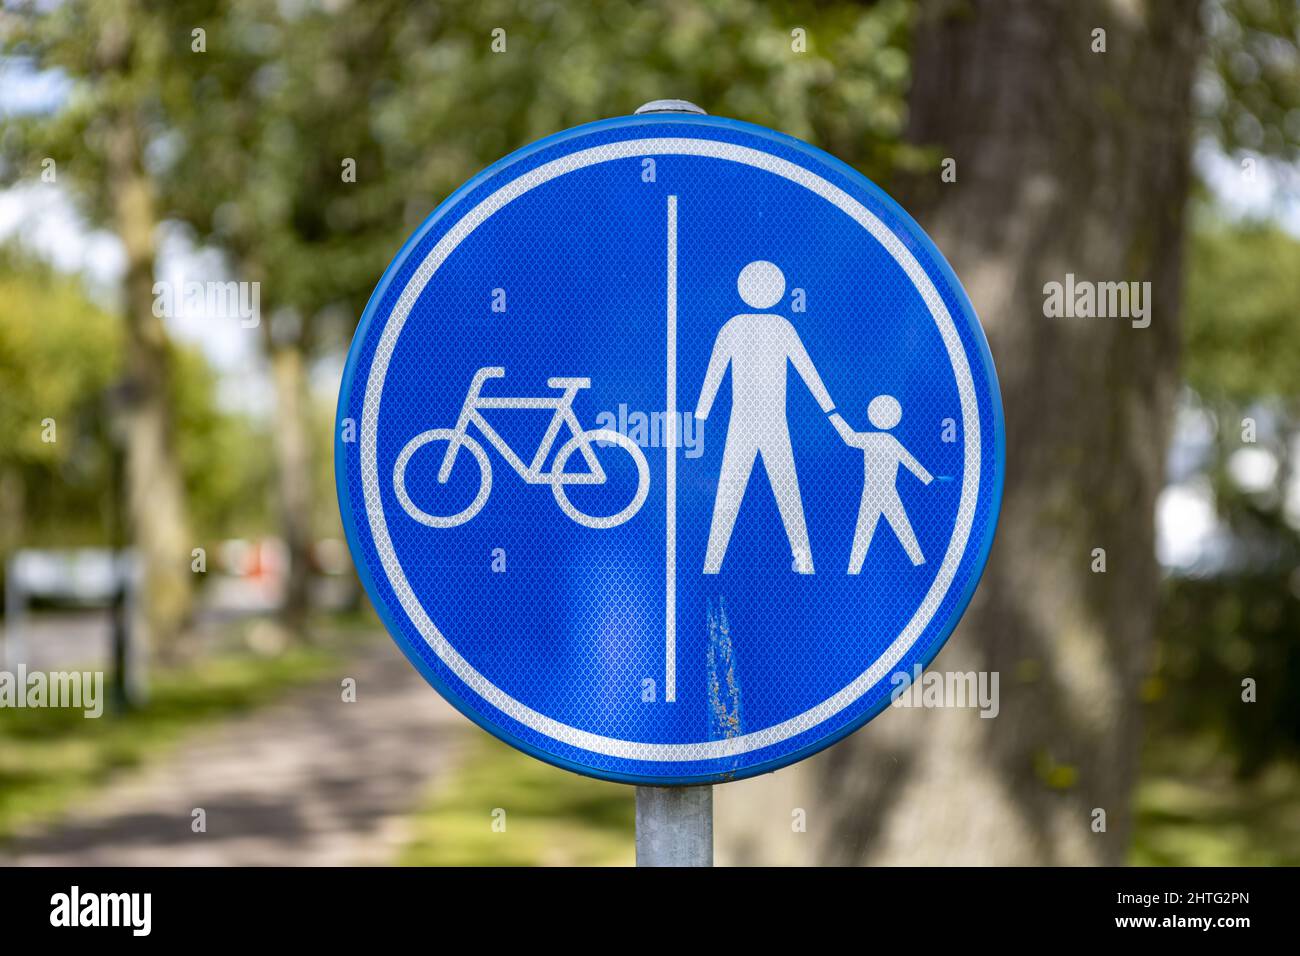 Official traffic sign in The Netherlands Stock Photo